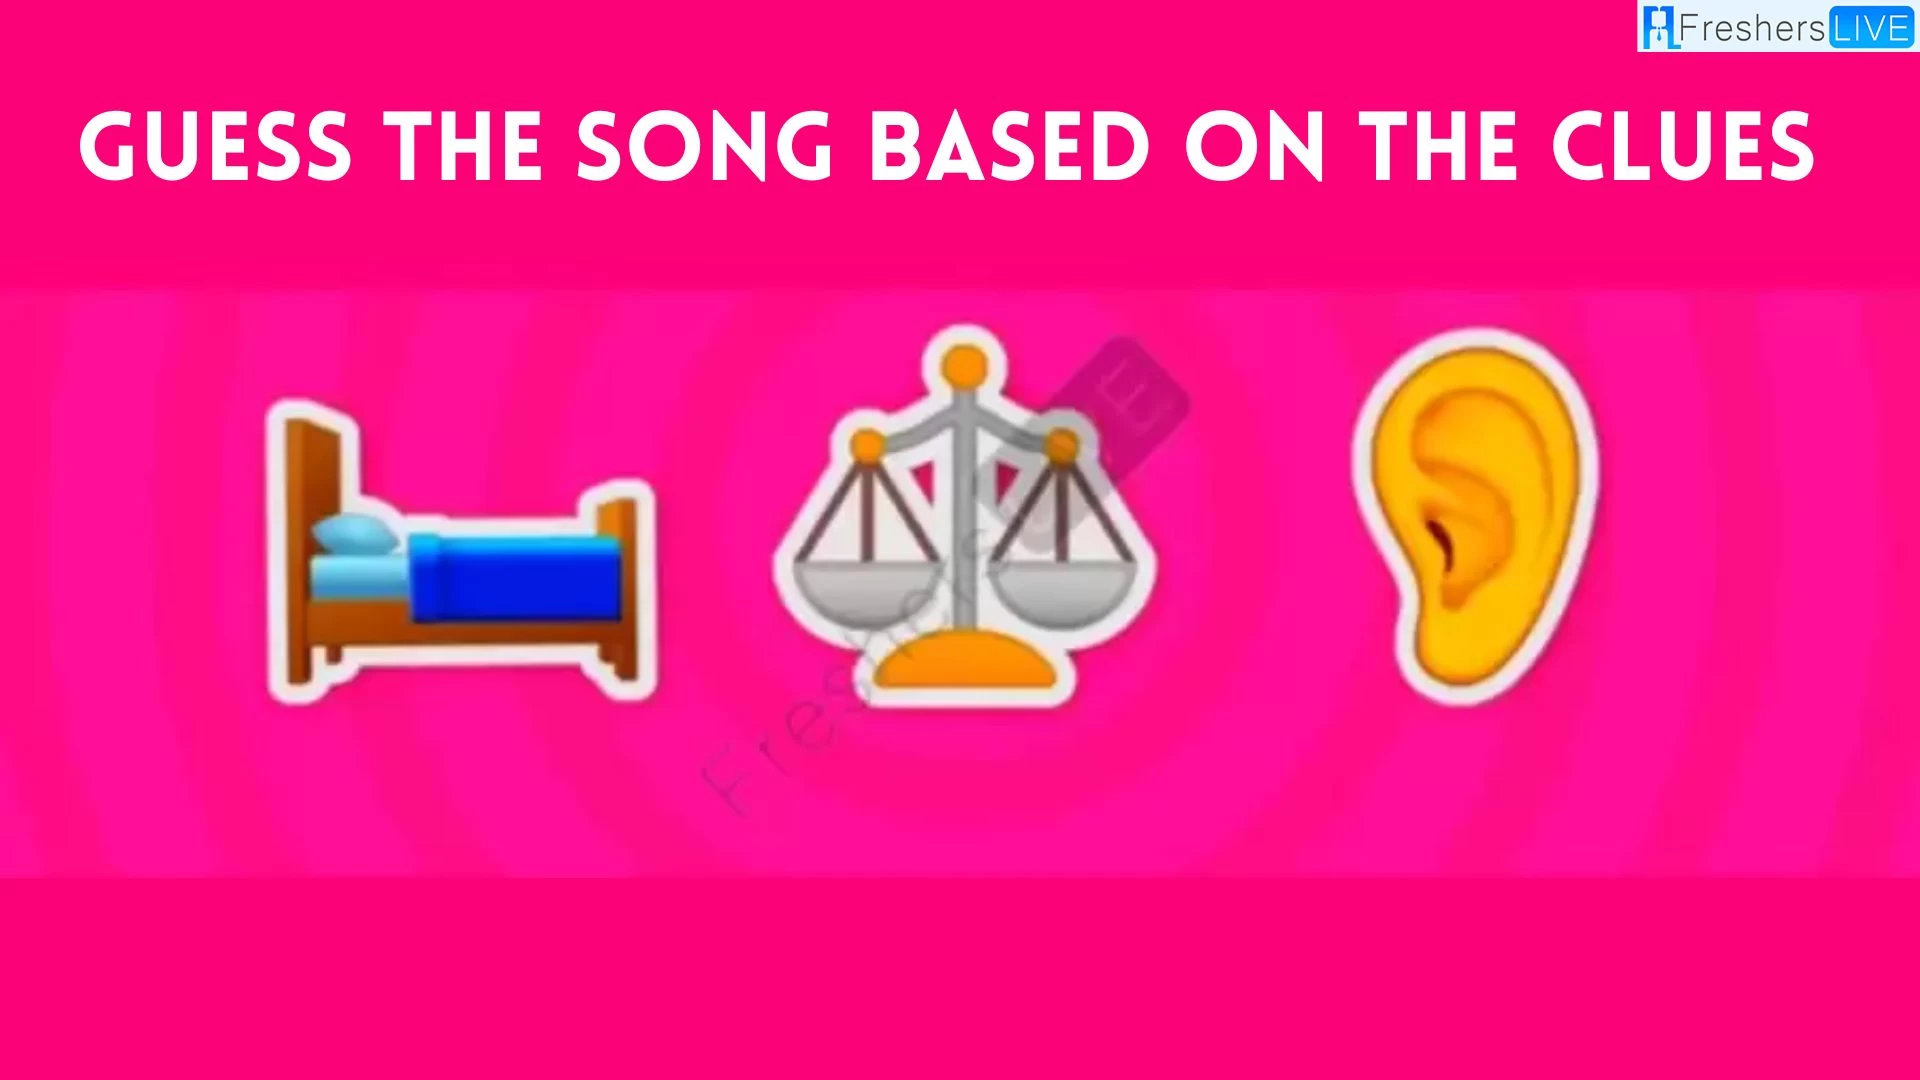 Guess the song based on the clues in 10 seconds!